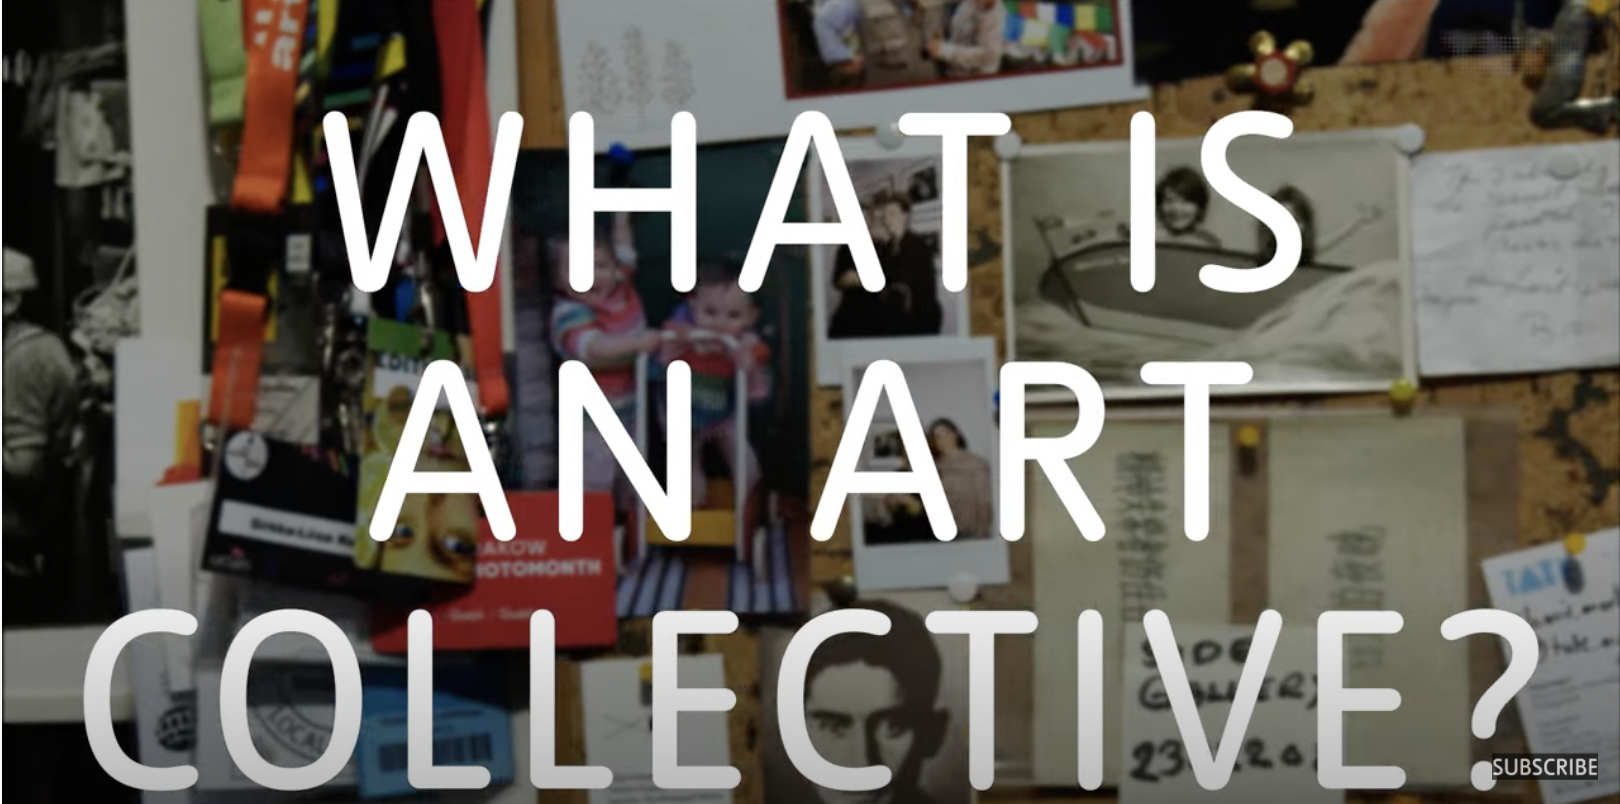 "What Is An Art Collective? | Tate (VIDEO)"